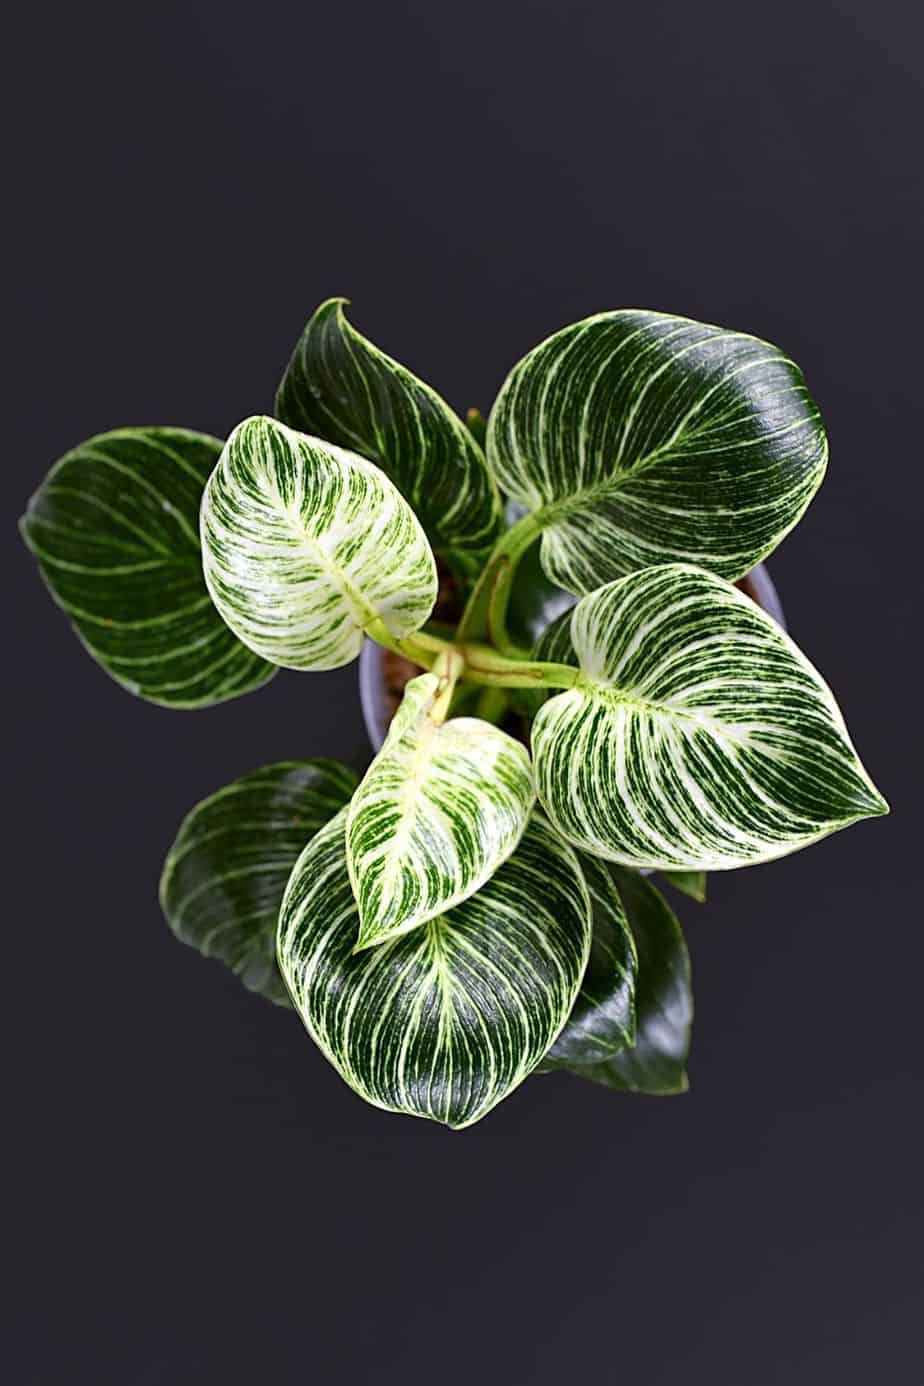 Philodendron Birkins are known for their pale cream, white, or light green striations